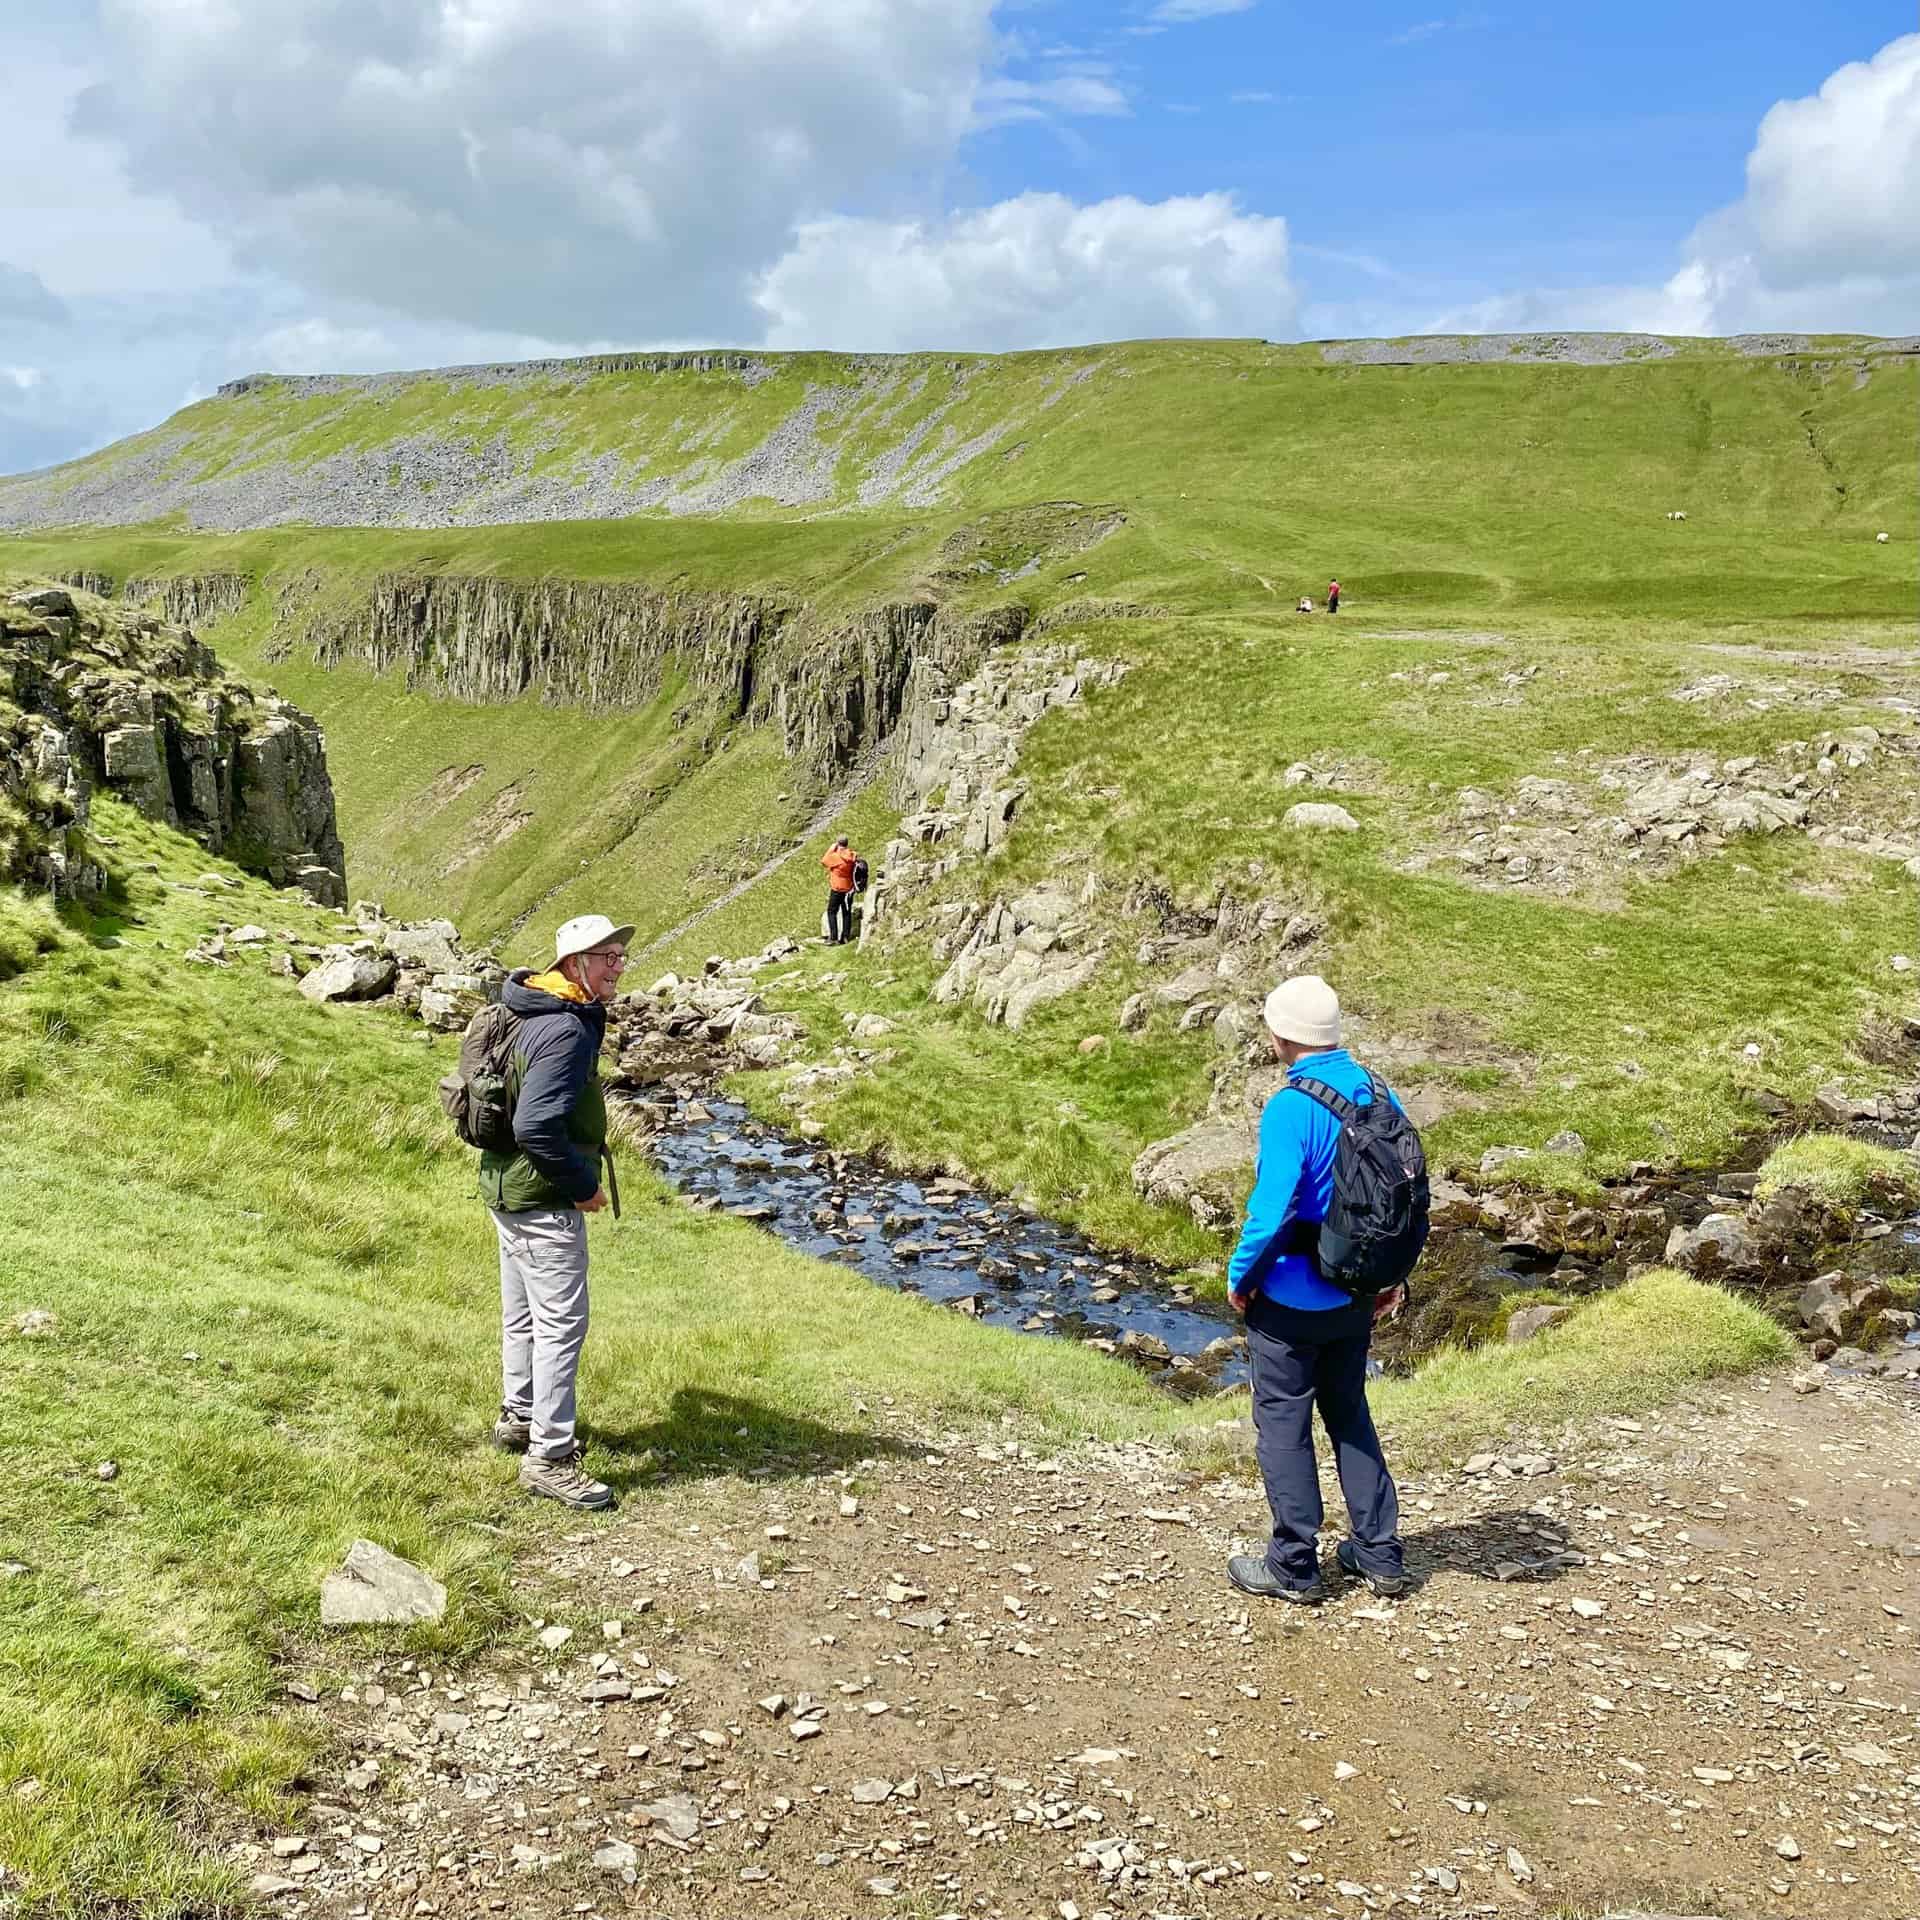 We reach High Cupgill Head where a small stream topples over the rocky crags into the valley below.